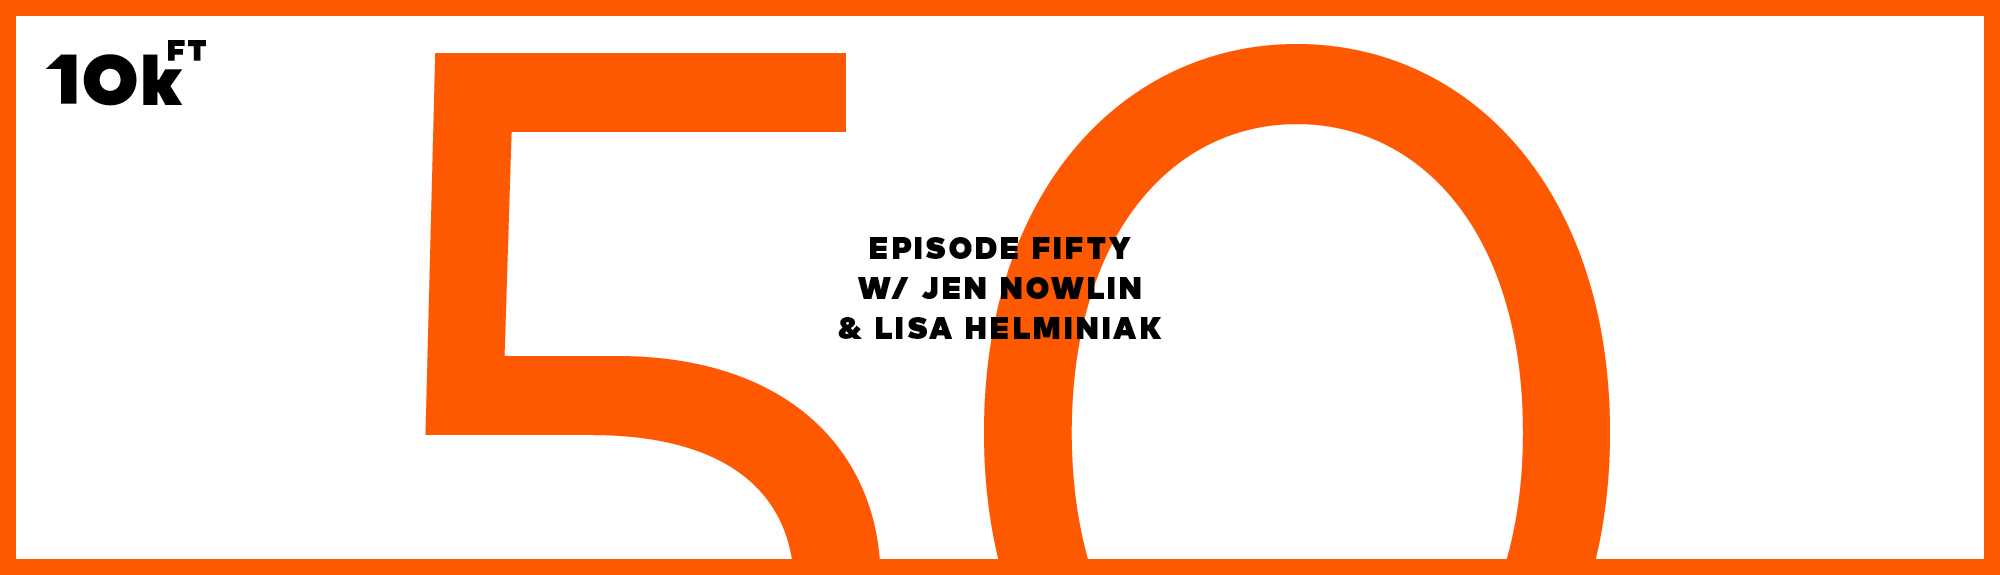 Orange rectangle with a white inside background. Top right corner has "10k ft" written. In the middle, the text reads "Episode Fifty w/ Jen Nowlin & Lisa Helminiak". A large "50" is written in orange behind this middle text.